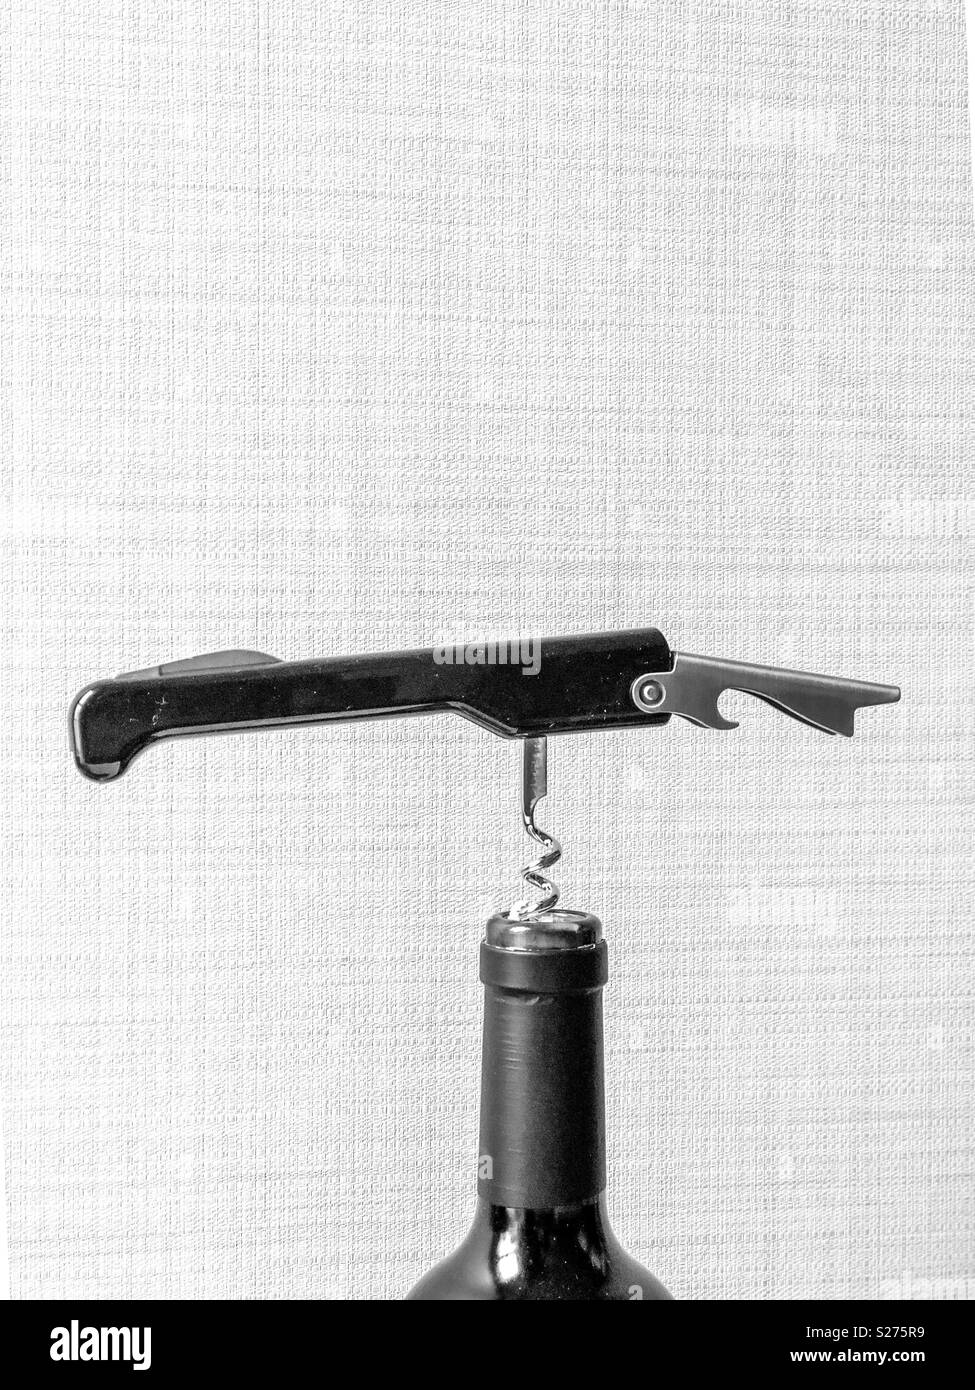 Corkscrew twisted into a cork, in a bottle of wine in black and white Stock Photo